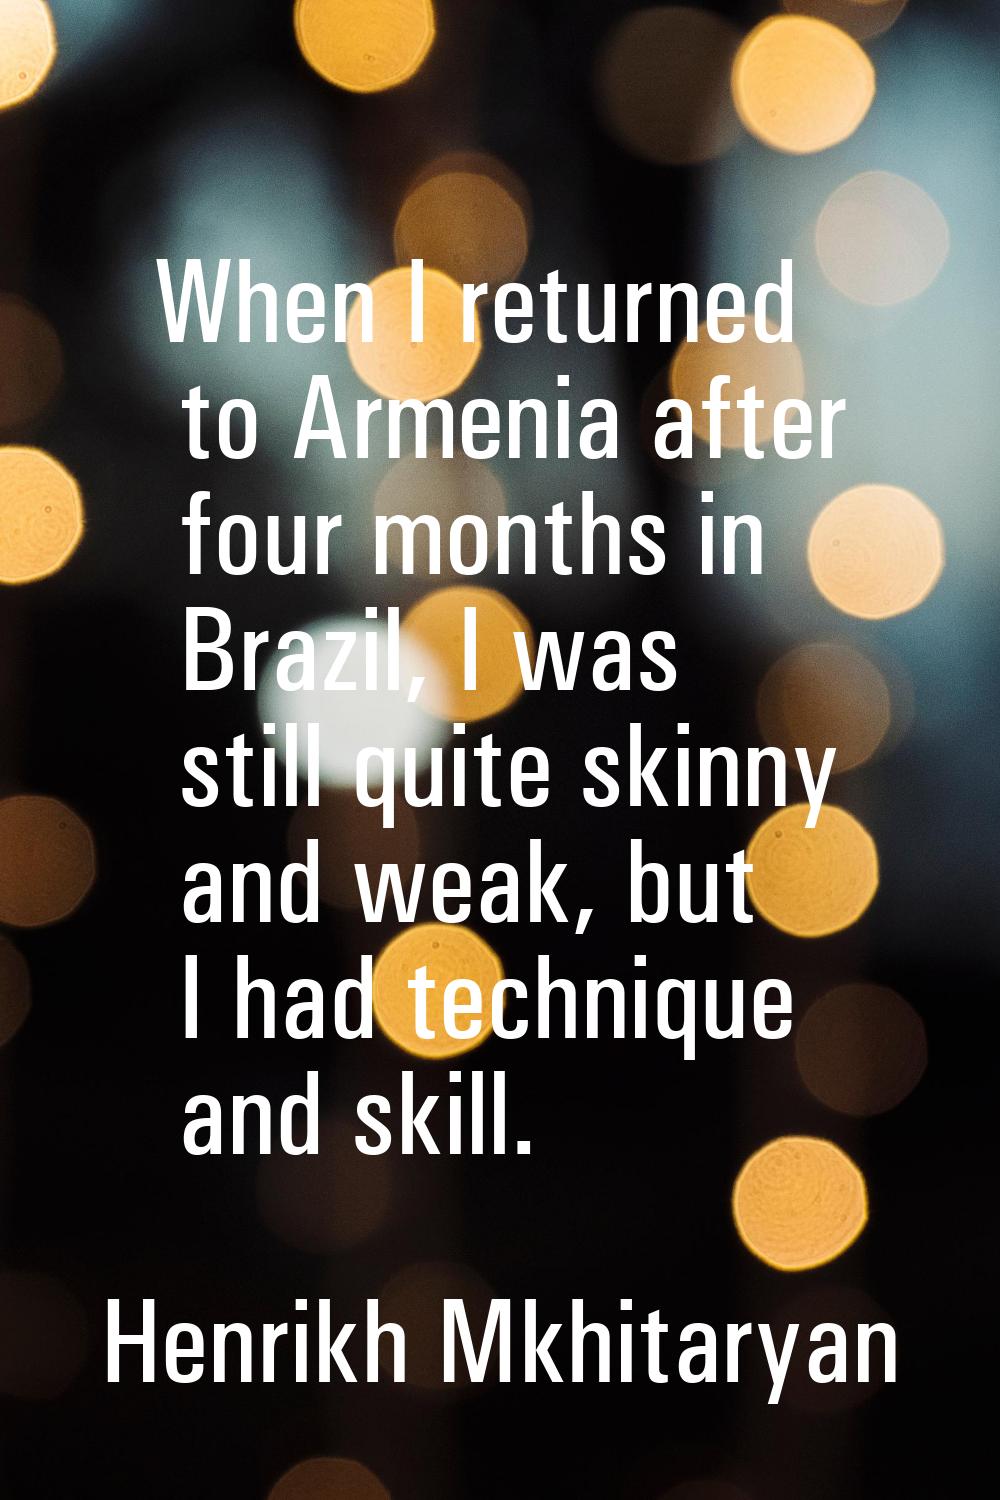 When I returned to Armenia after four months in Brazil, I was still quite skinny and weak, but I ha